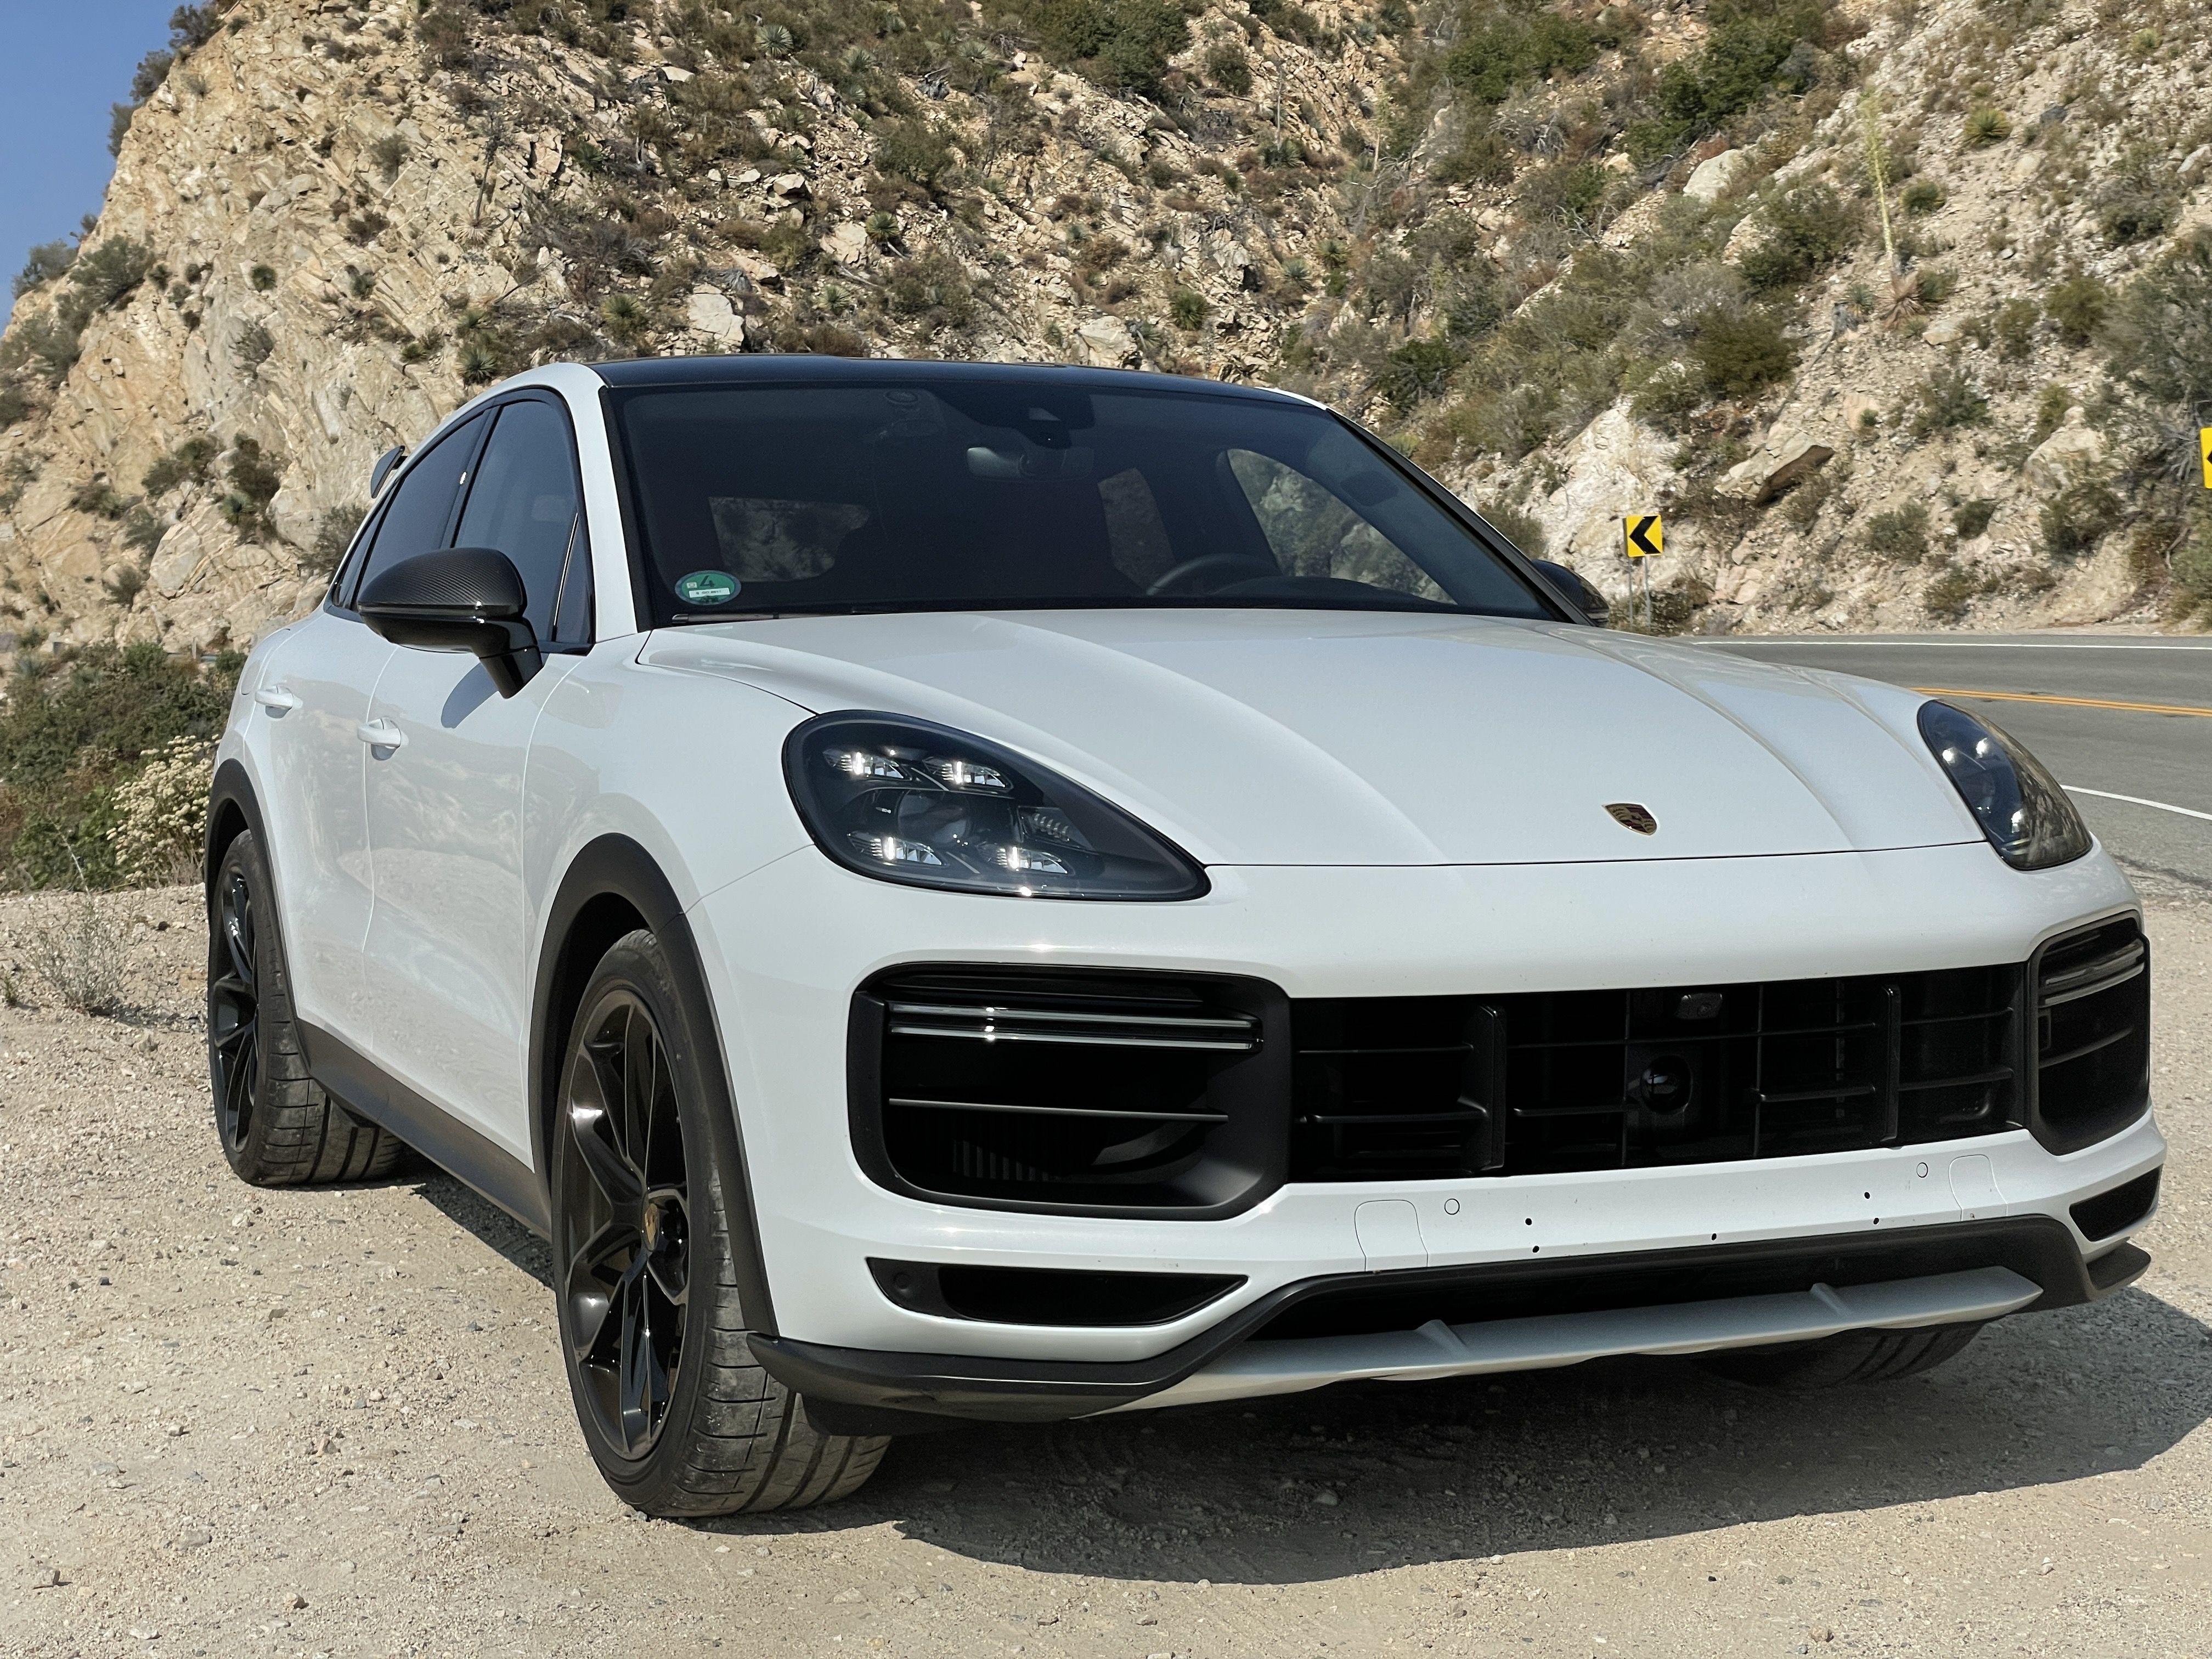 The Porsche Cayenne Turbo GT Review: Blurring the Lines